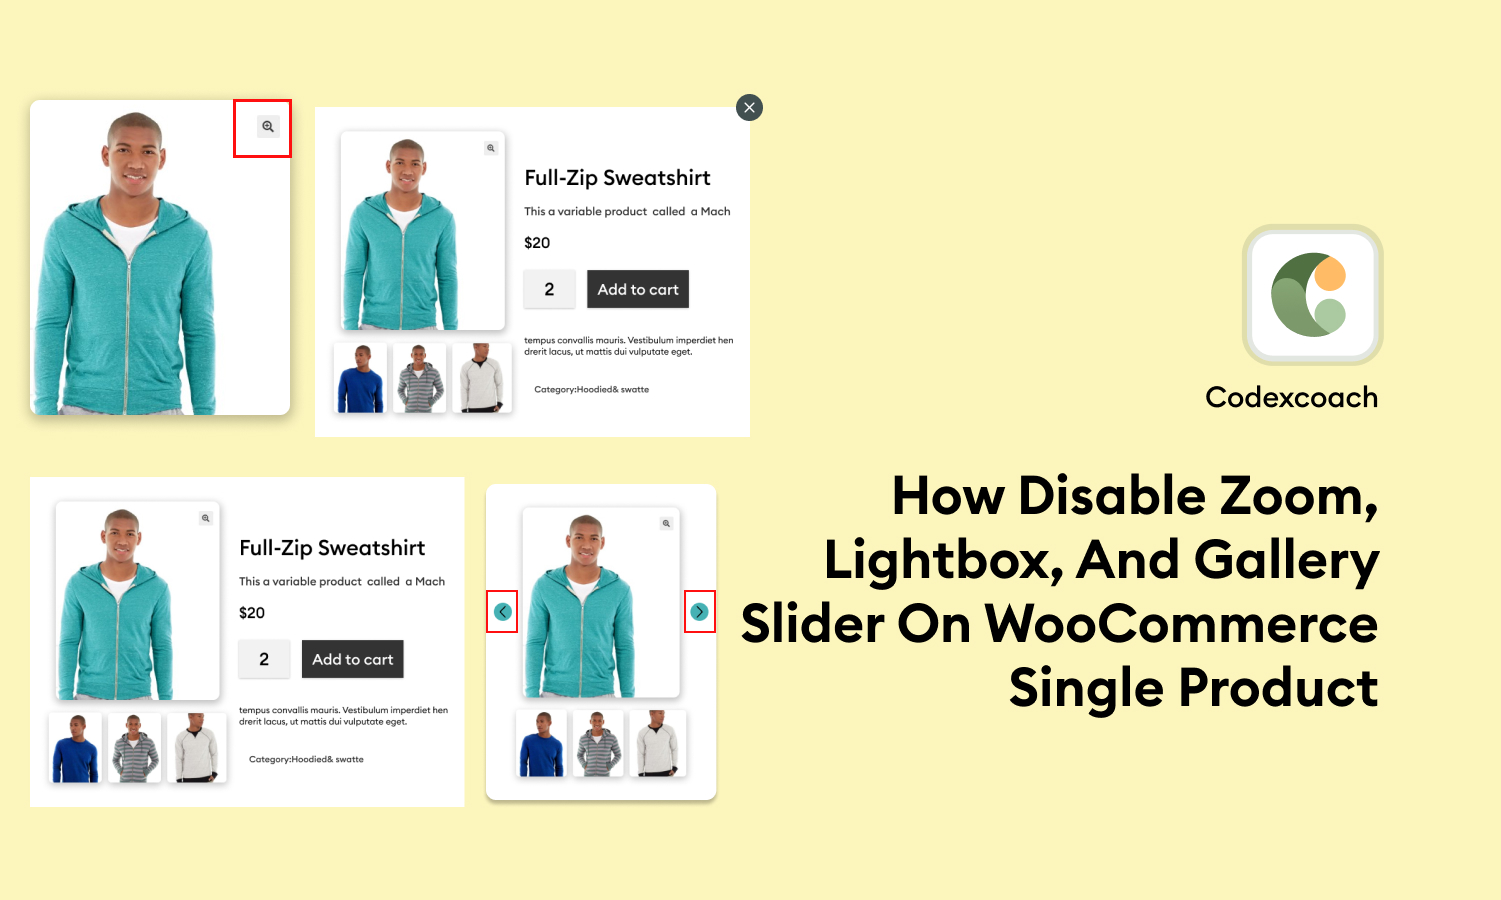 How Disable Zoom Lightbox And Gallery Slider On WooCommerce Single Product